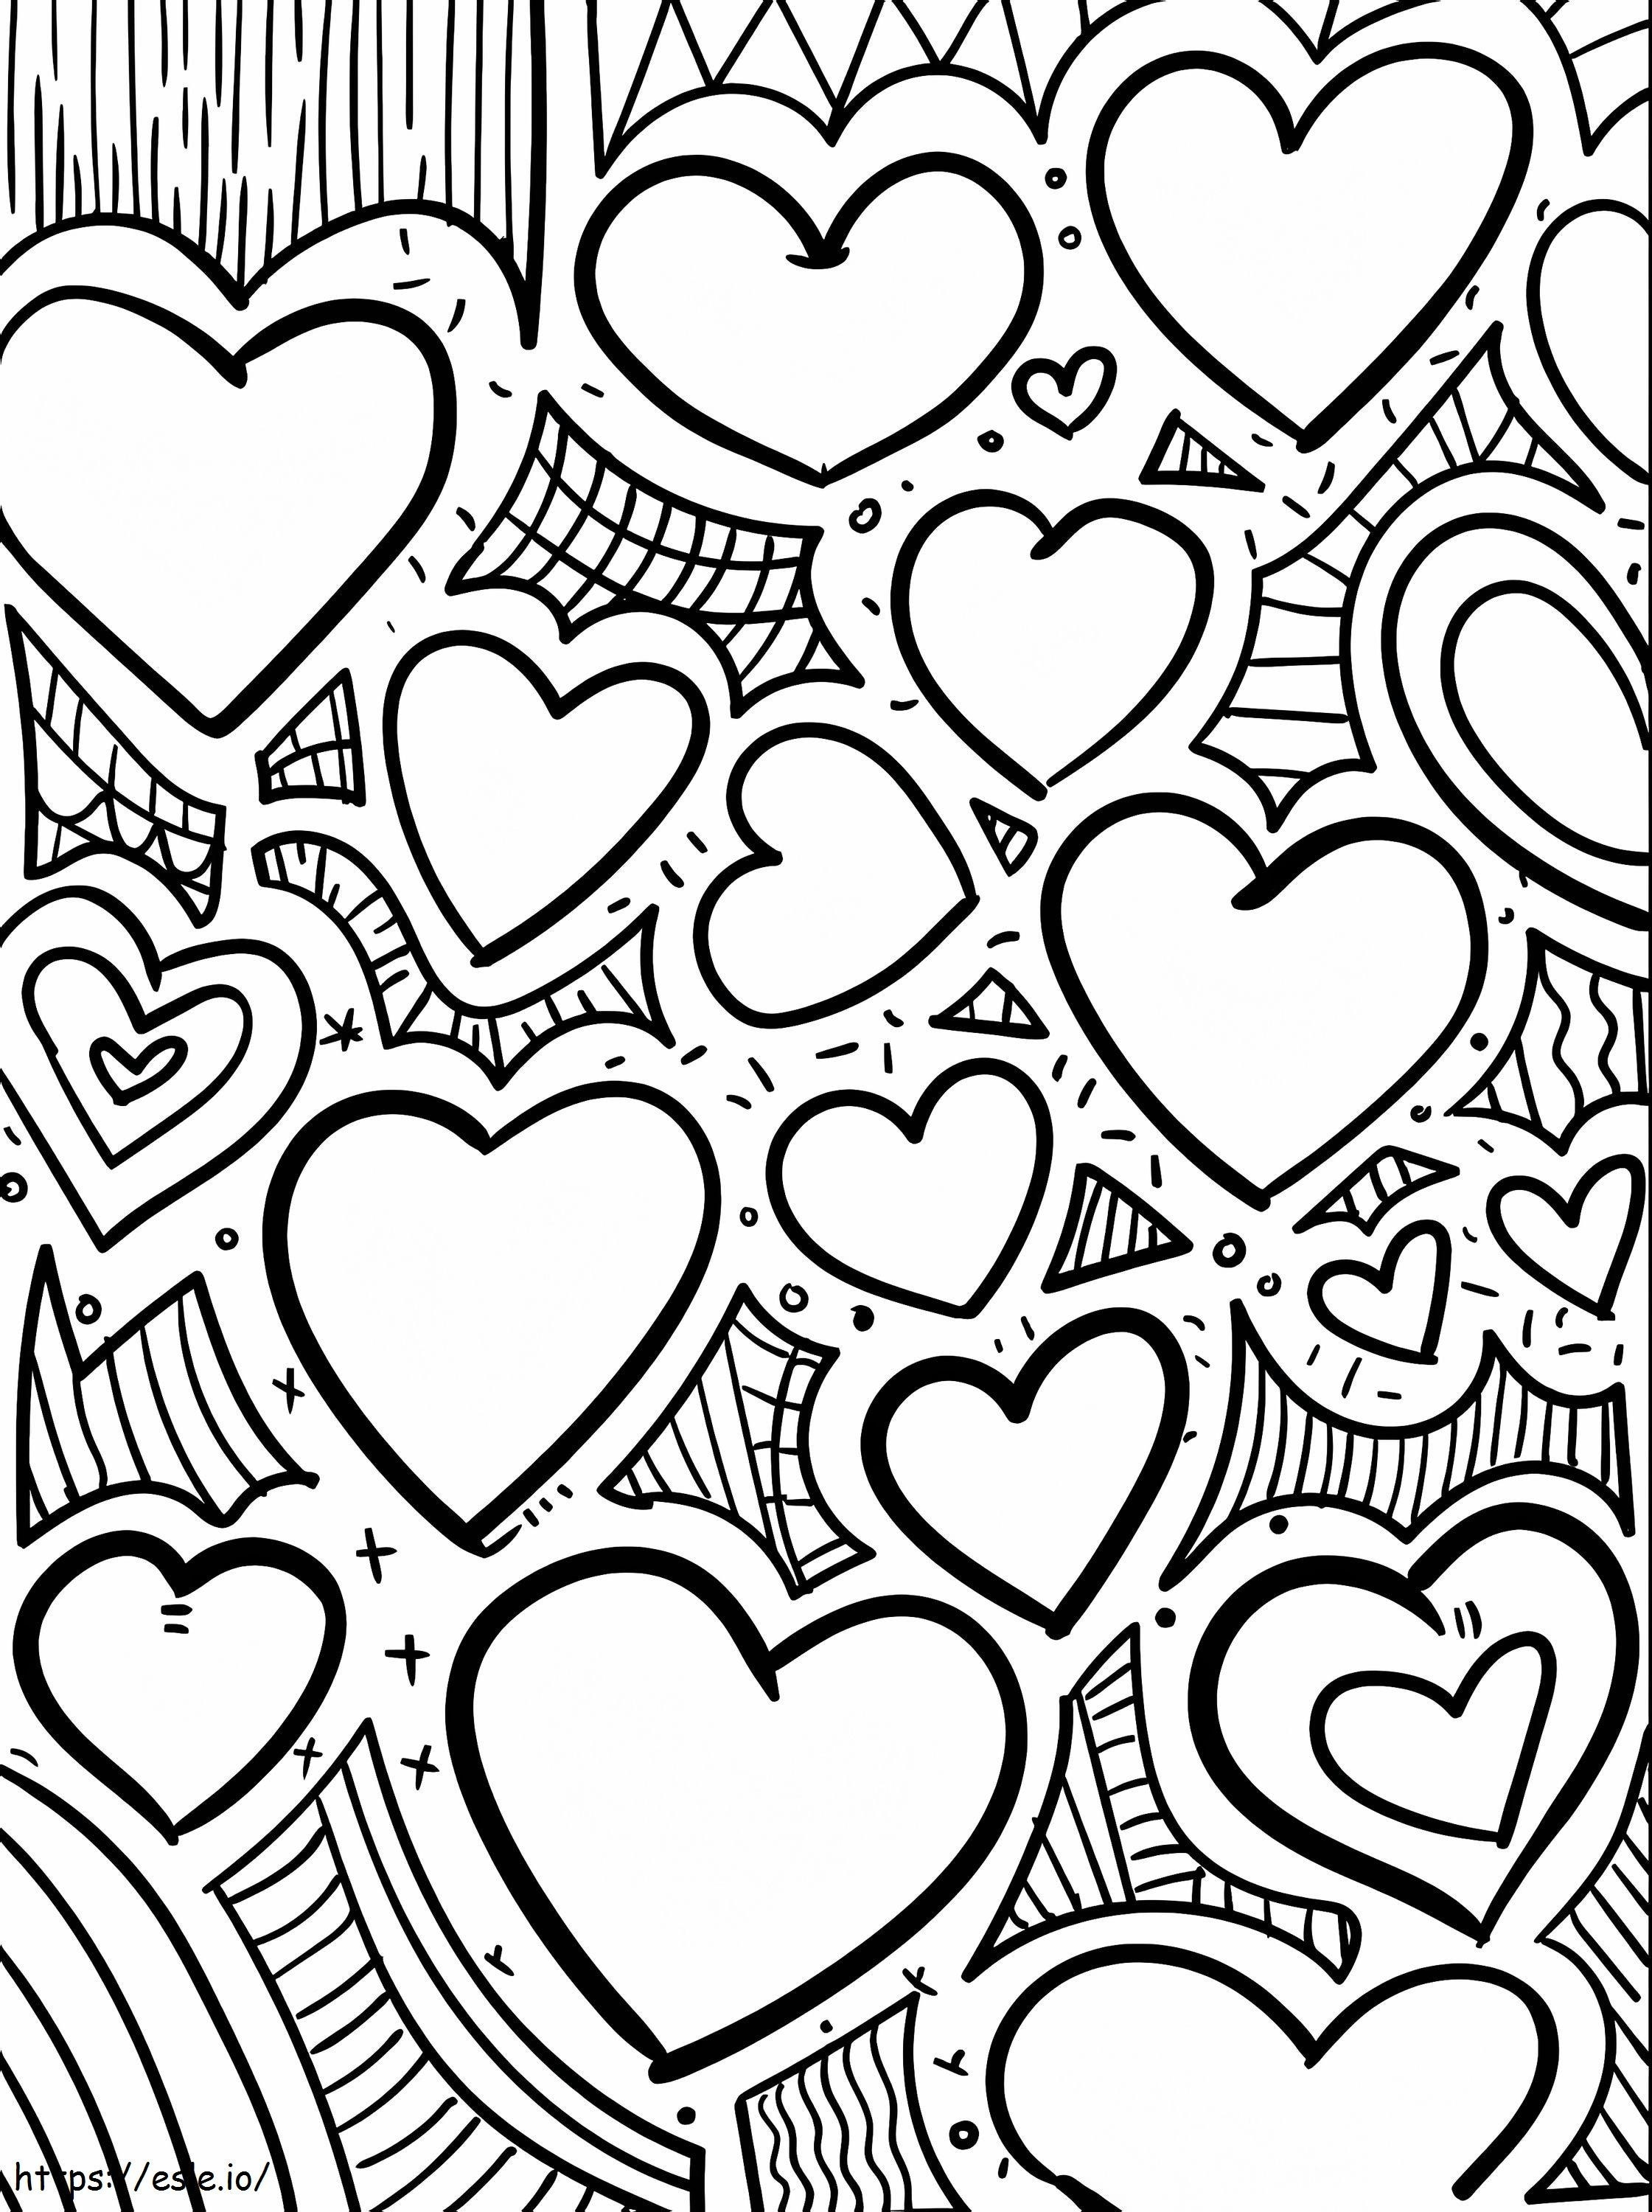 Hearts Design coloring page